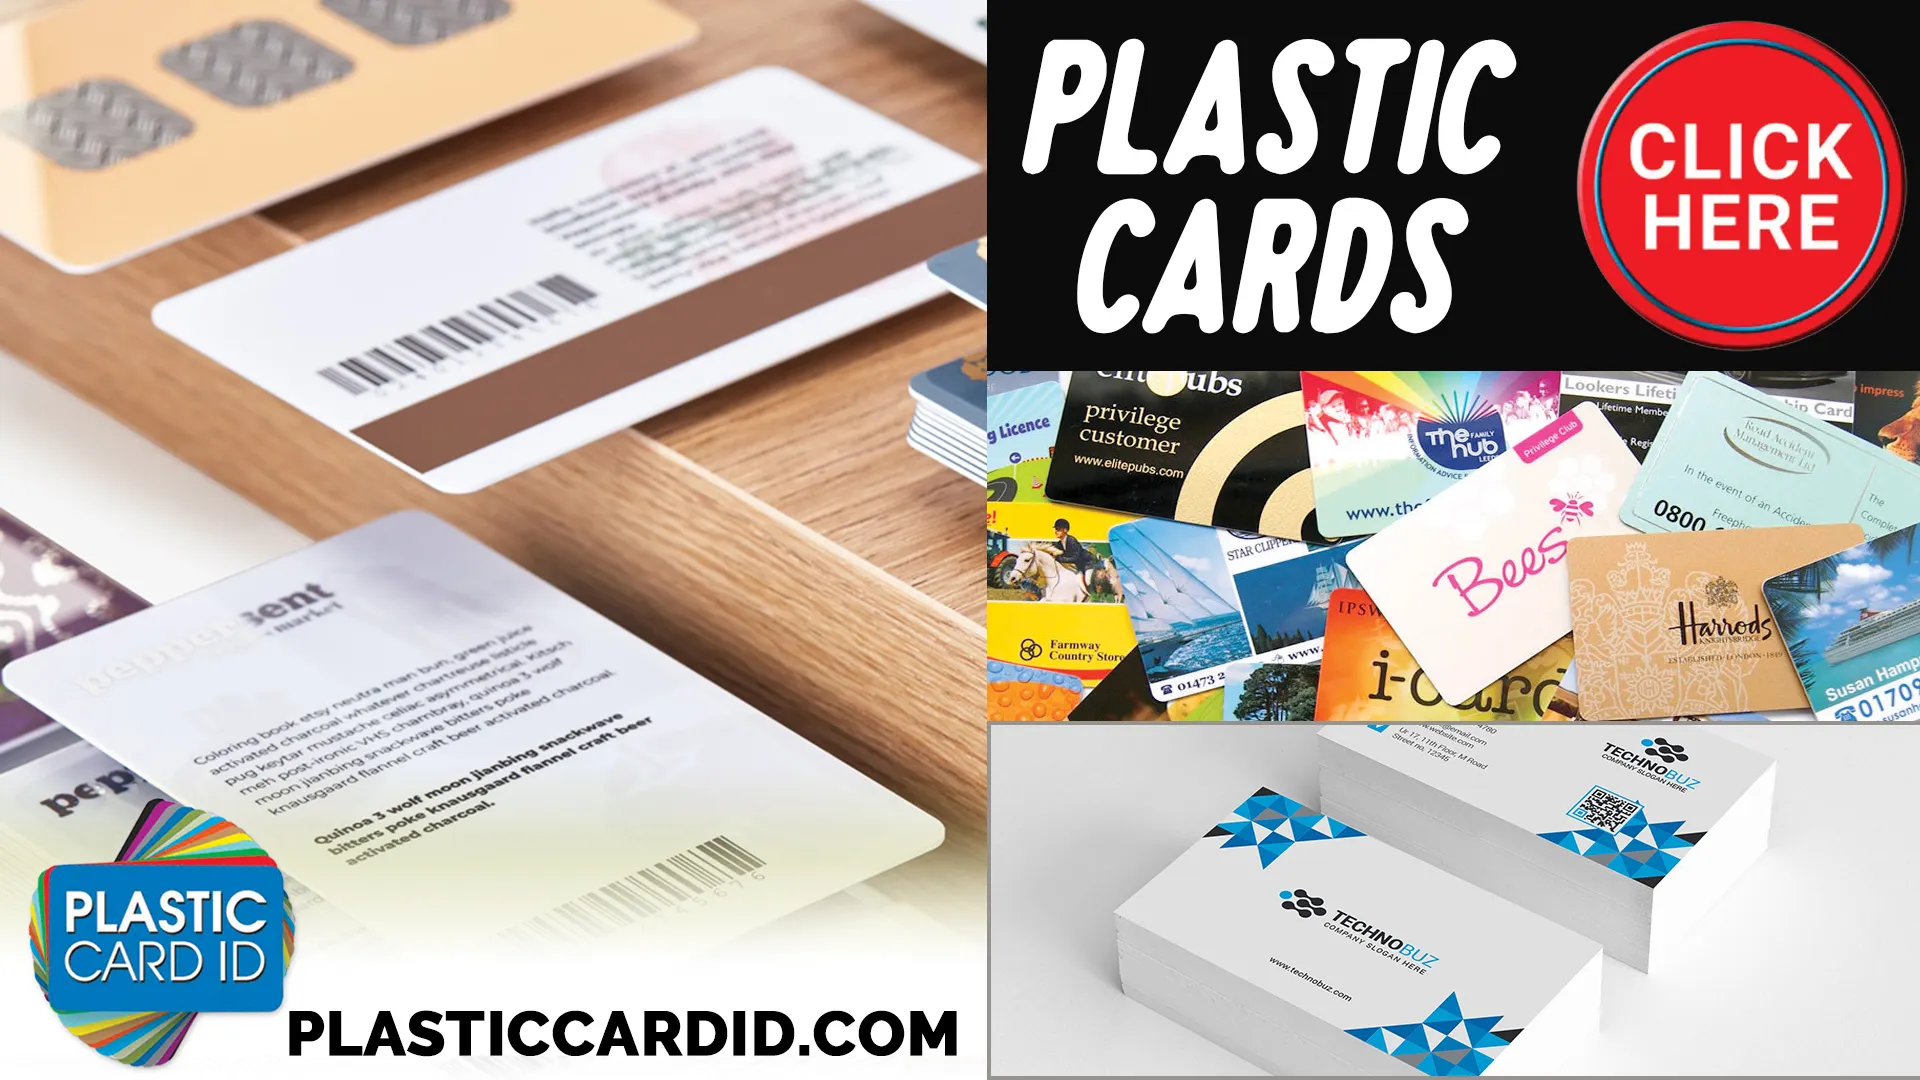 Plastic Card Printers and Supplies: The Professional